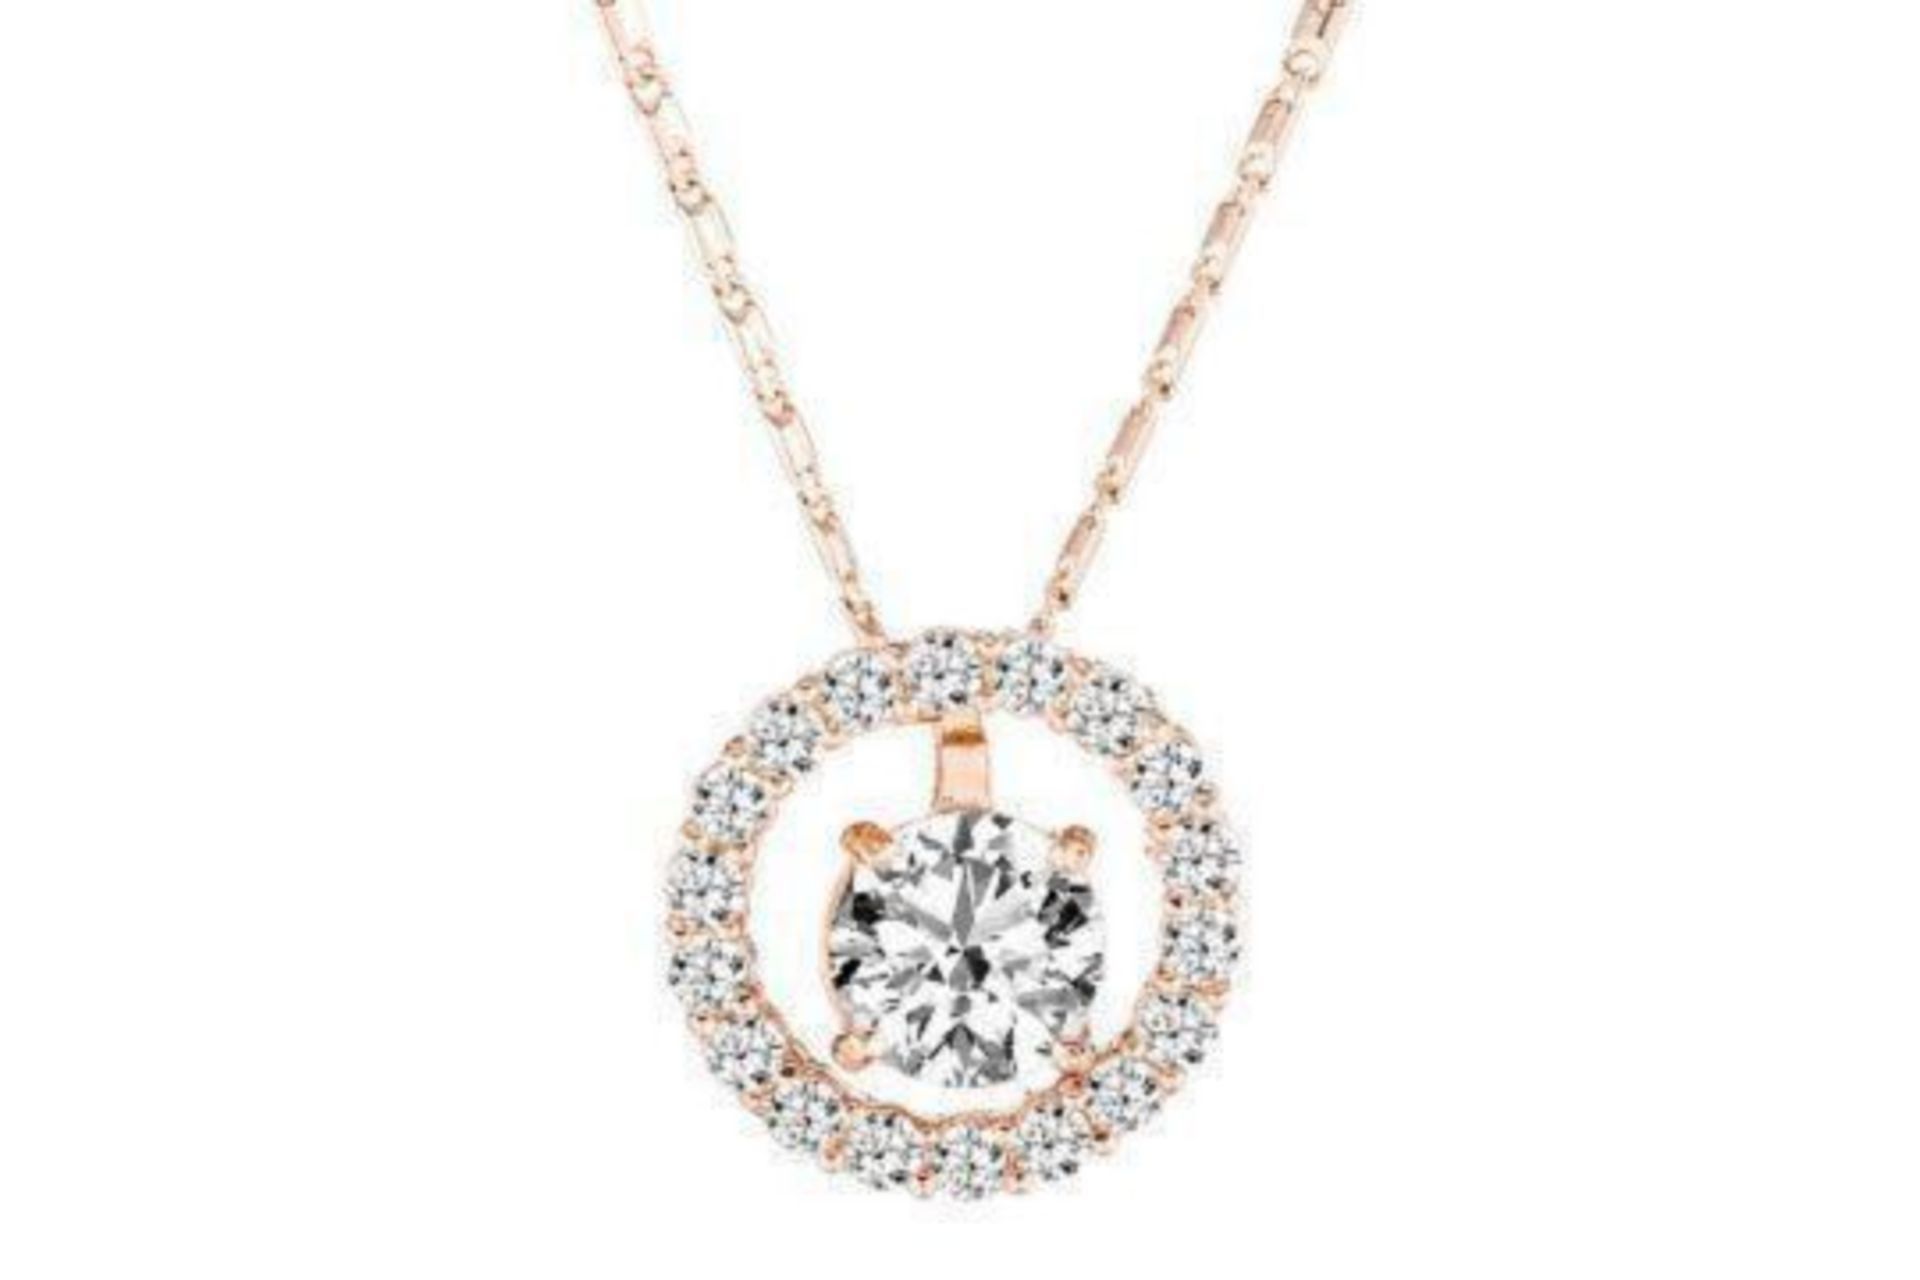 10 X BRAND NEW DIAMONDSTYLE LONDON SOLSTICE PENDANT IN ROSE GOLD WITH CERTIFICATION OF